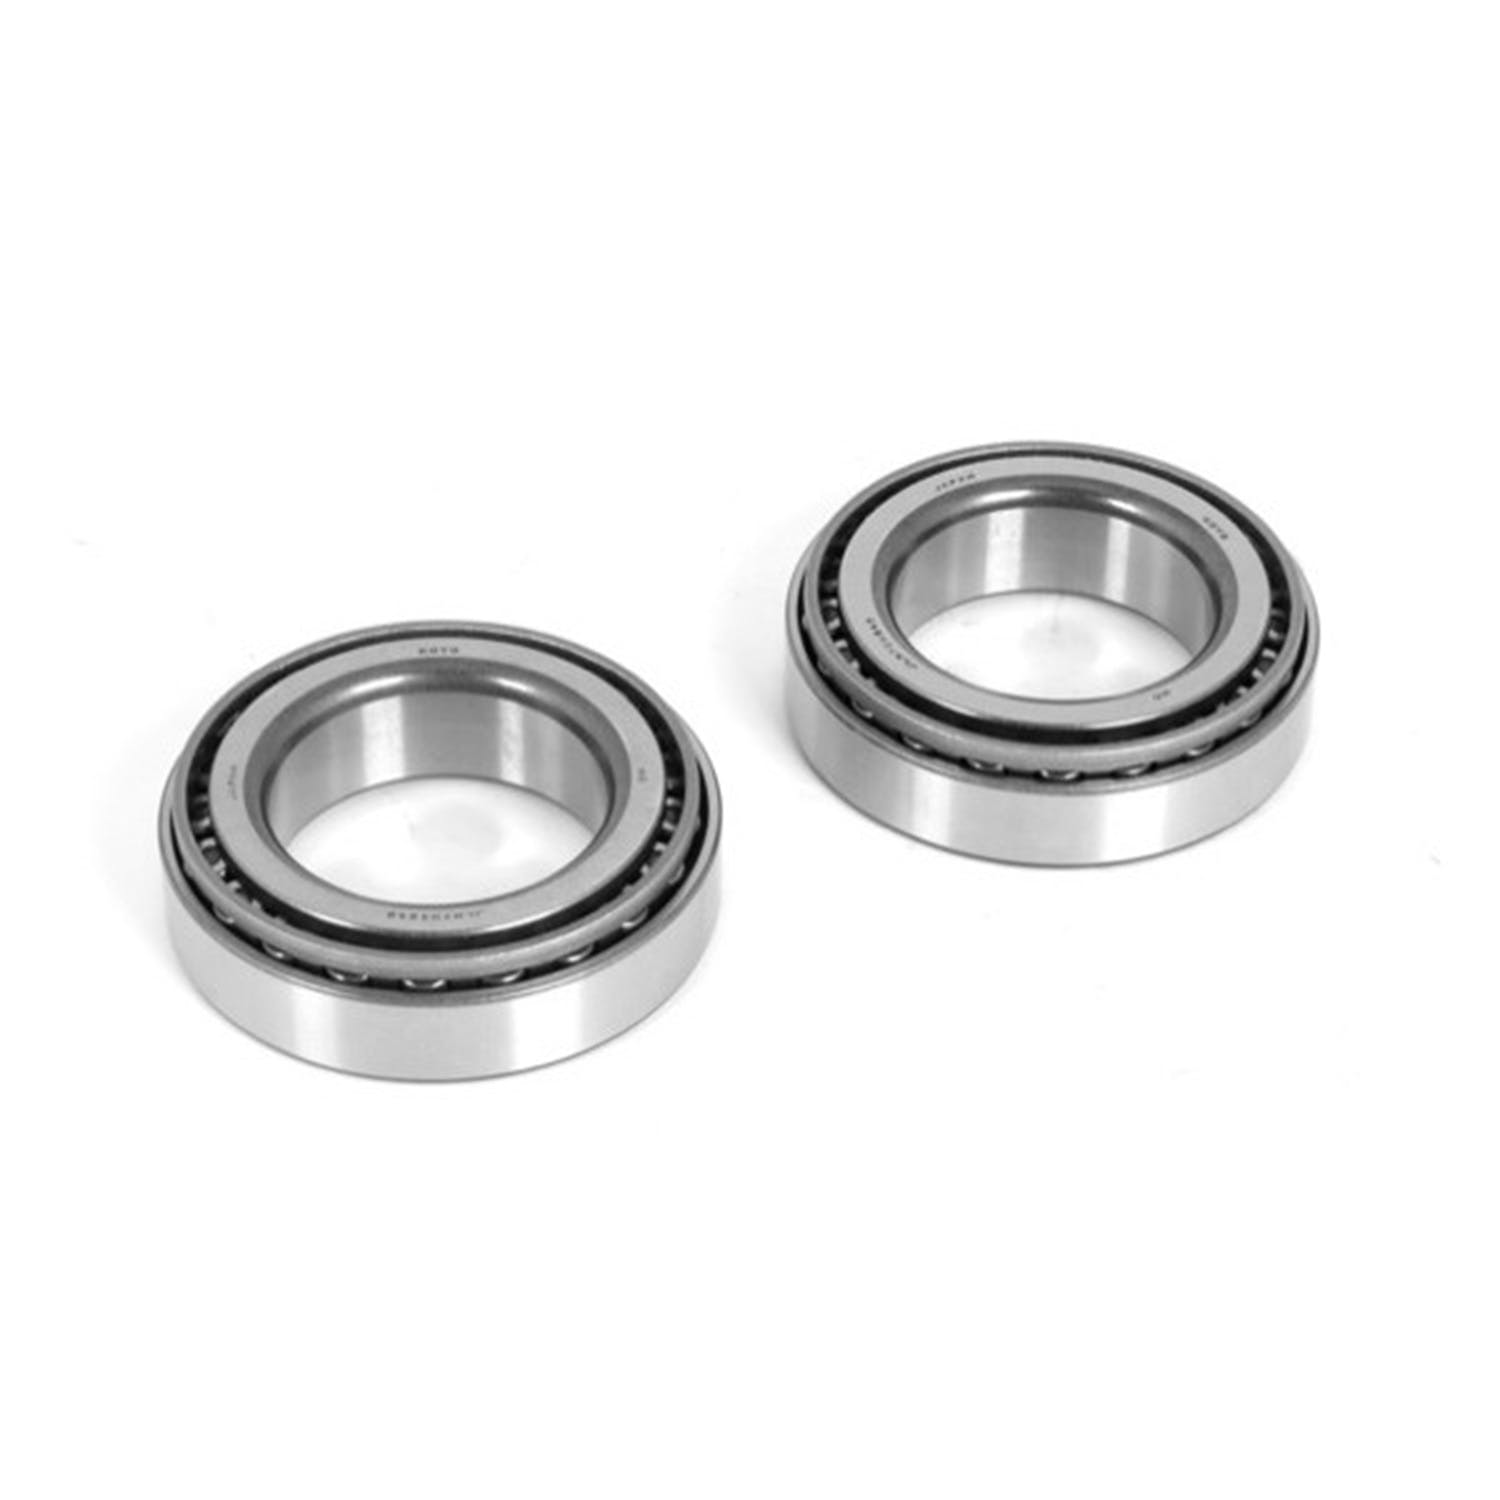 Omix-ADA 16509.10 Differential Bearing Kit Front